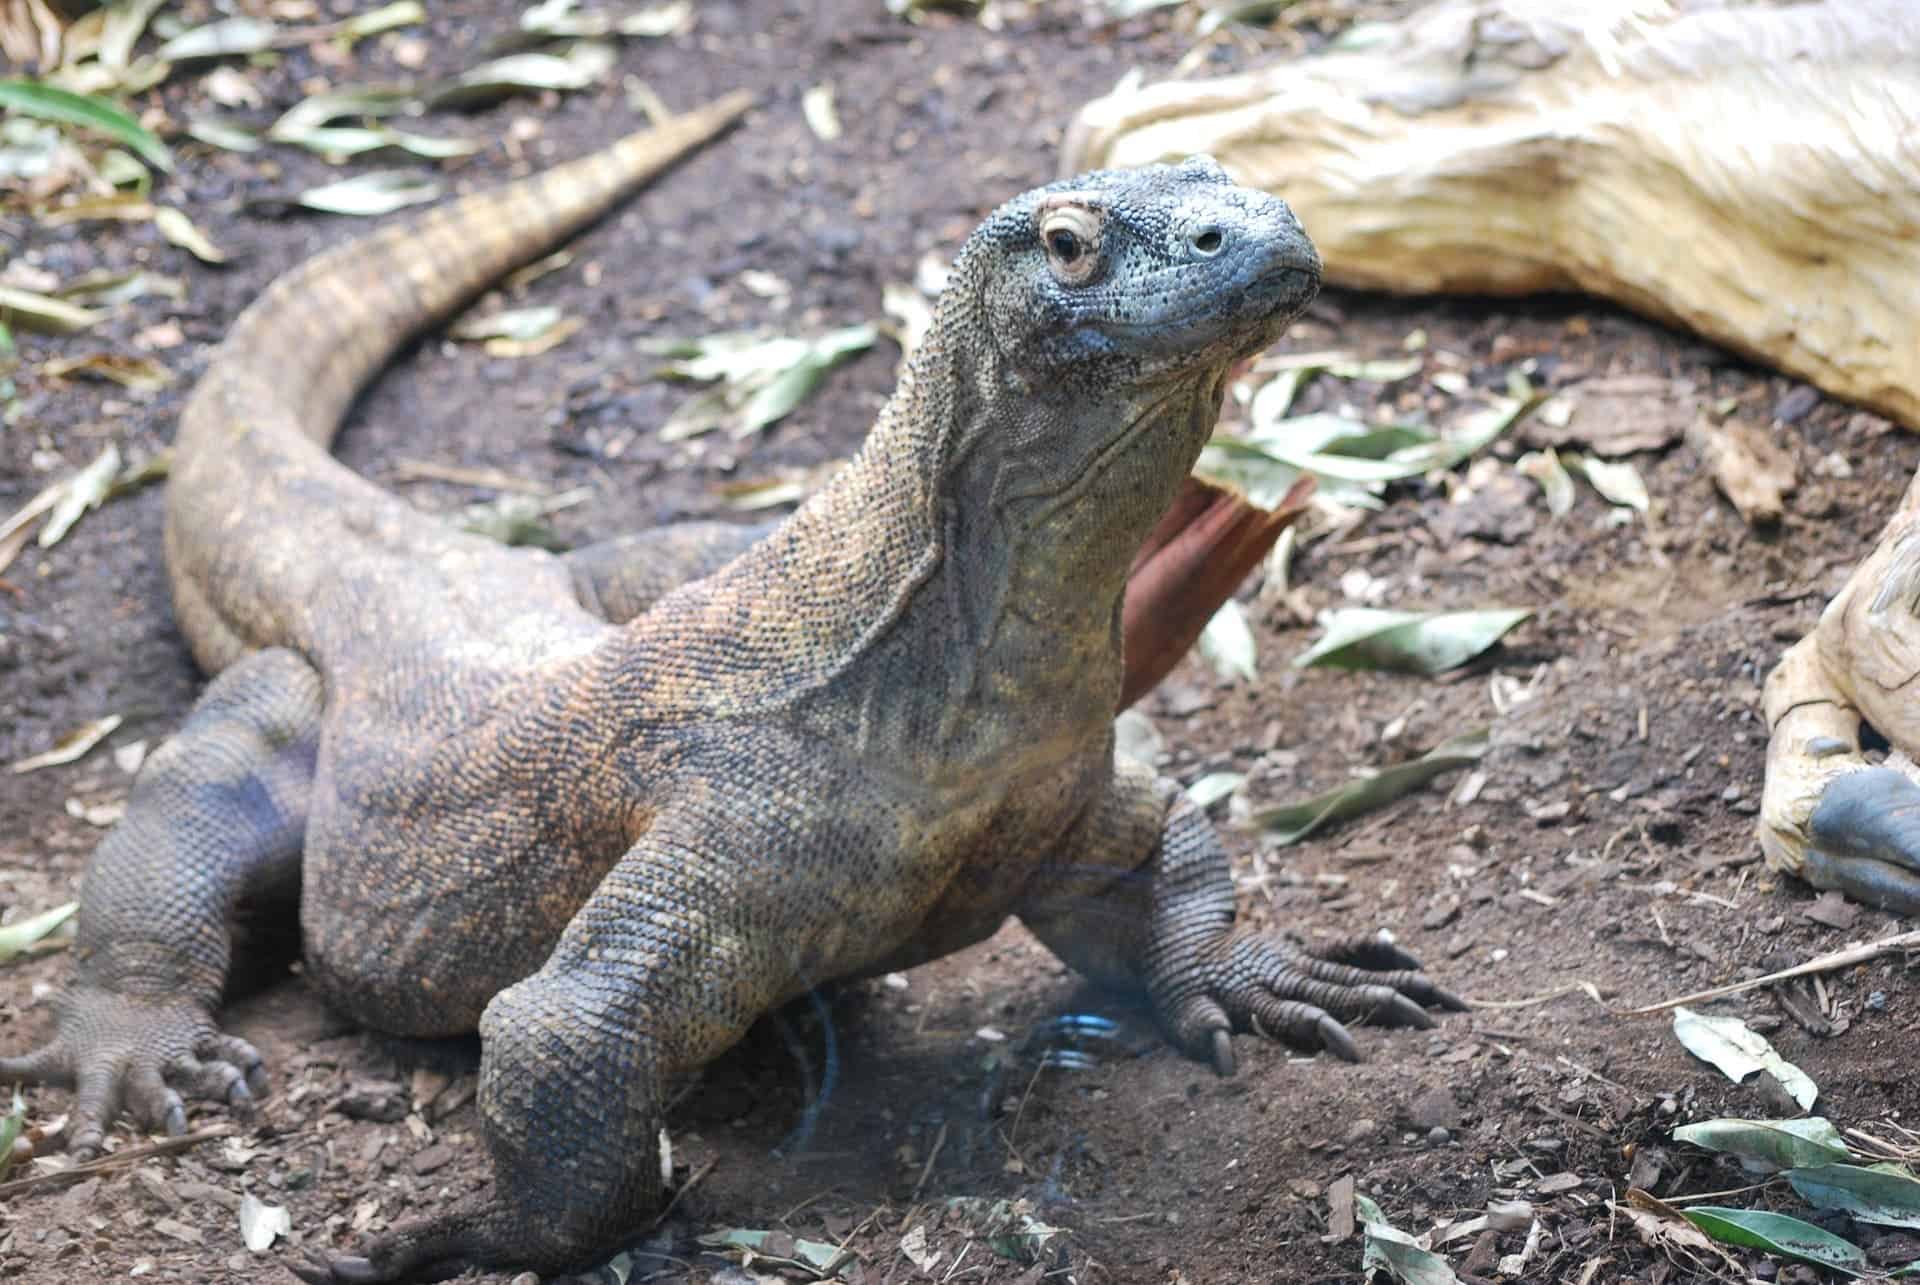 What are komodo dragons, the largest lizards in the world?